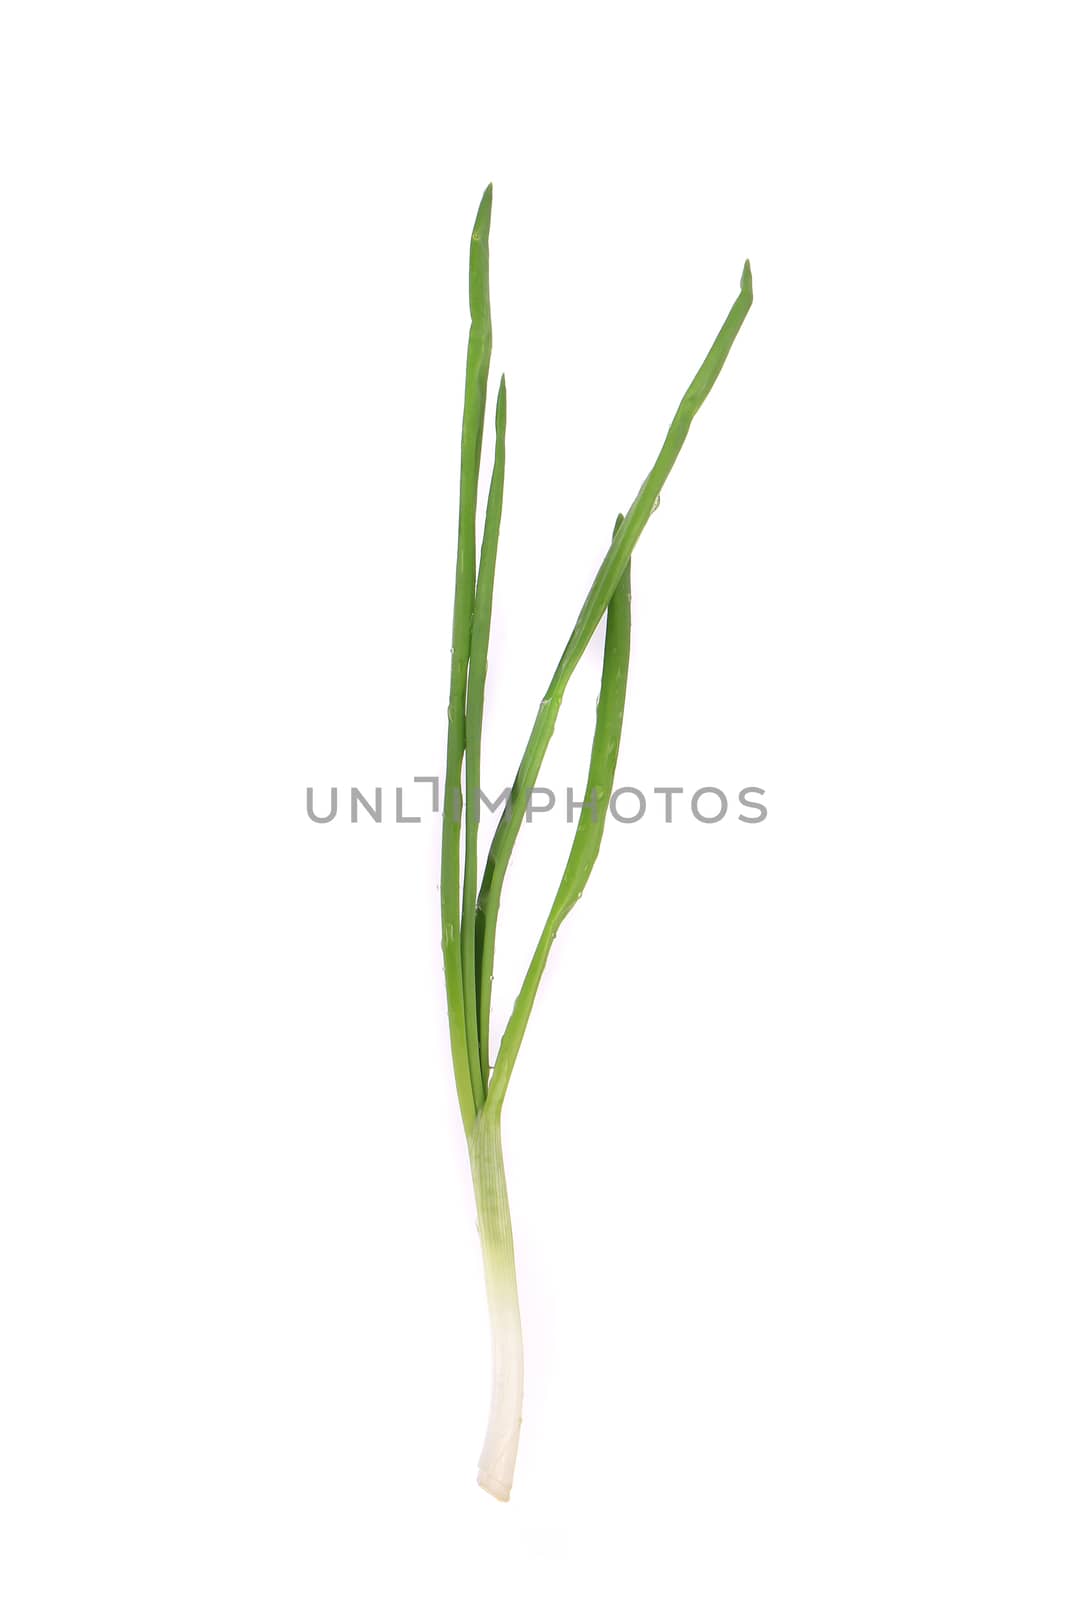 Green onion. Isolated on a white background.